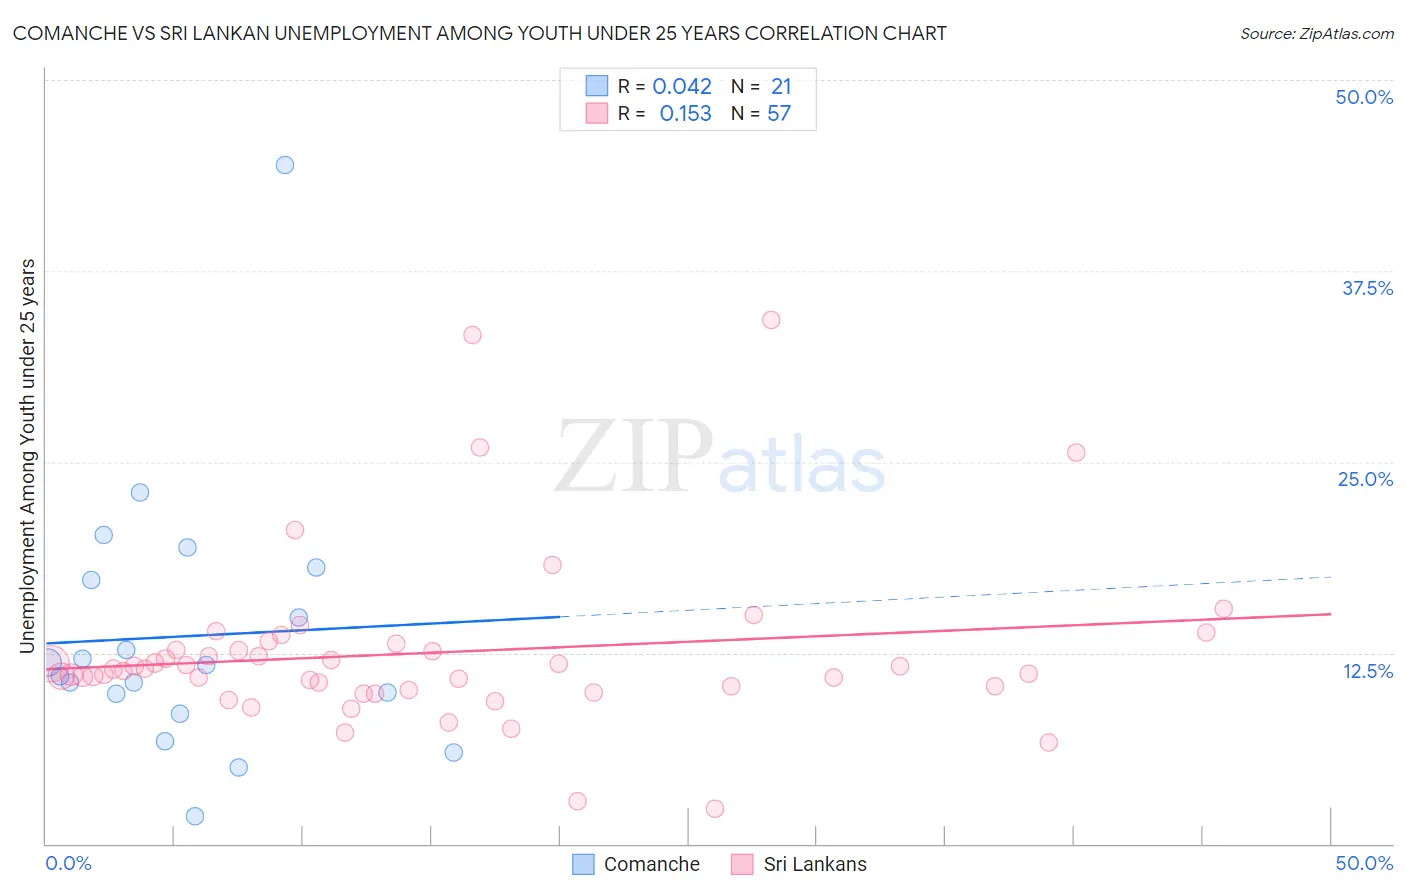 Comanche vs Sri Lankan Unemployment Among Youth under 25 years